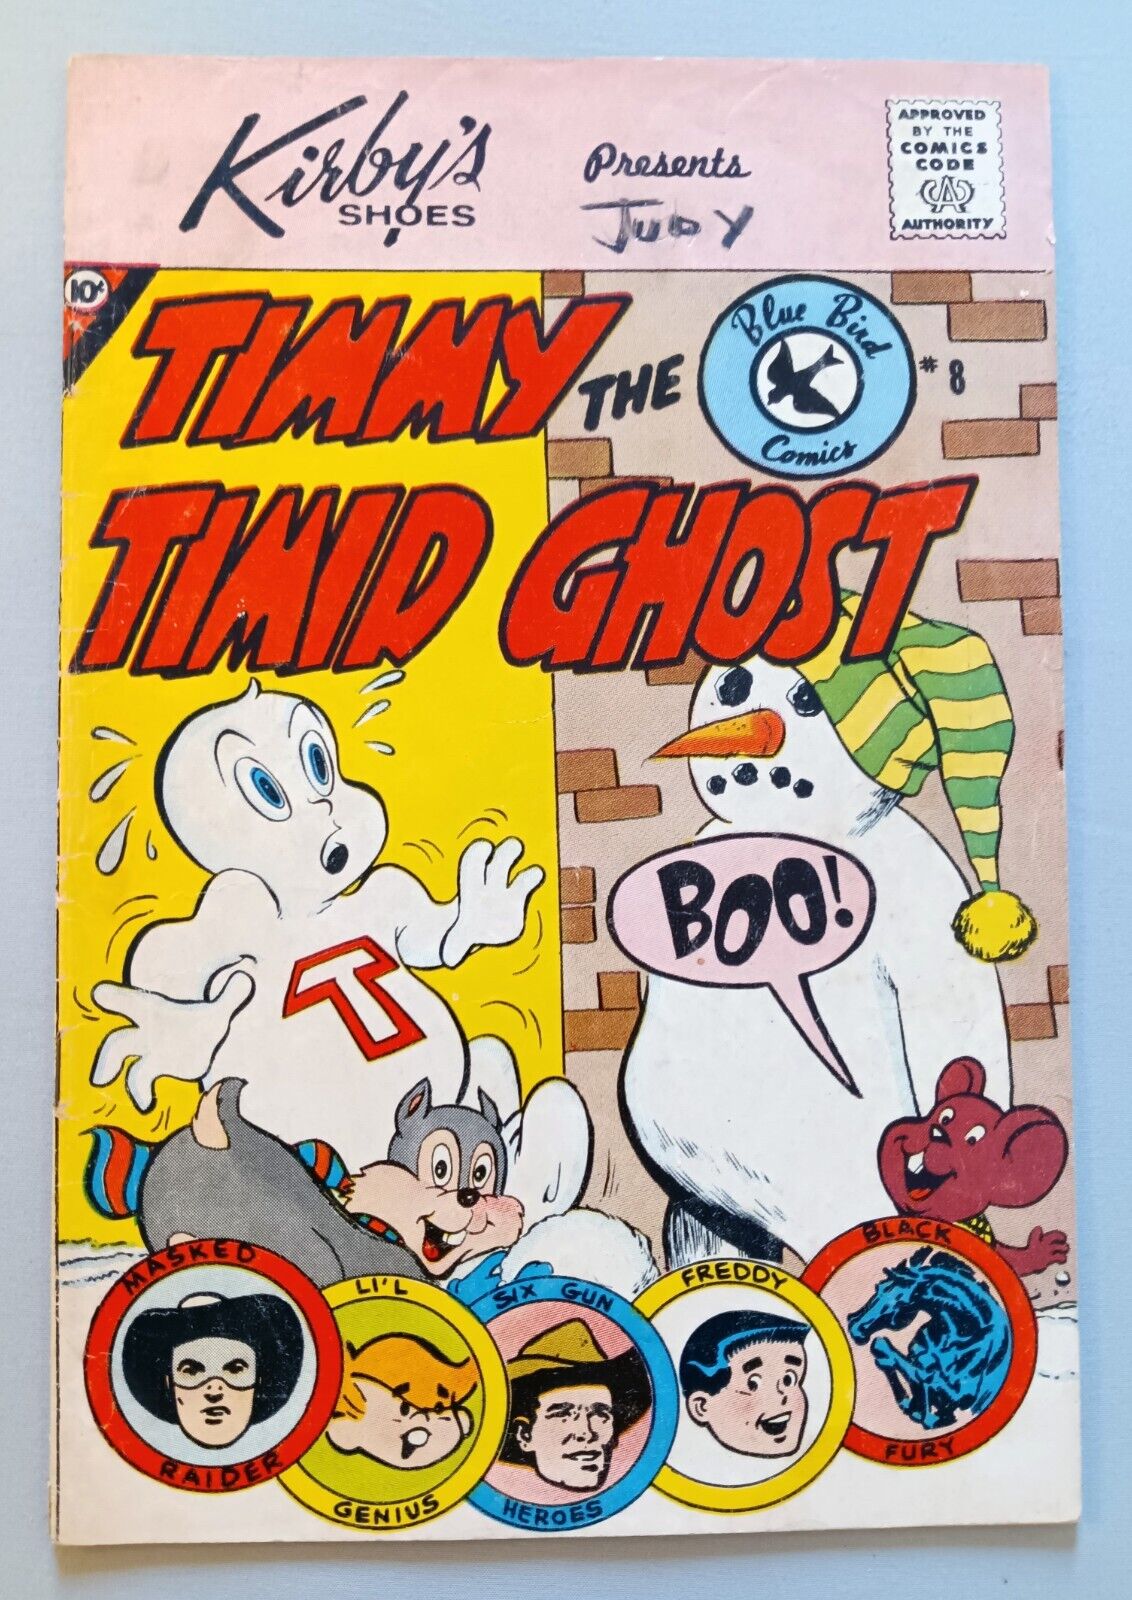 TIMMY THE TIMID GHOST #8, KIRBY'S SHOES, CHARLTON, BLUE BIRD, SILVER, GD-VG 1960